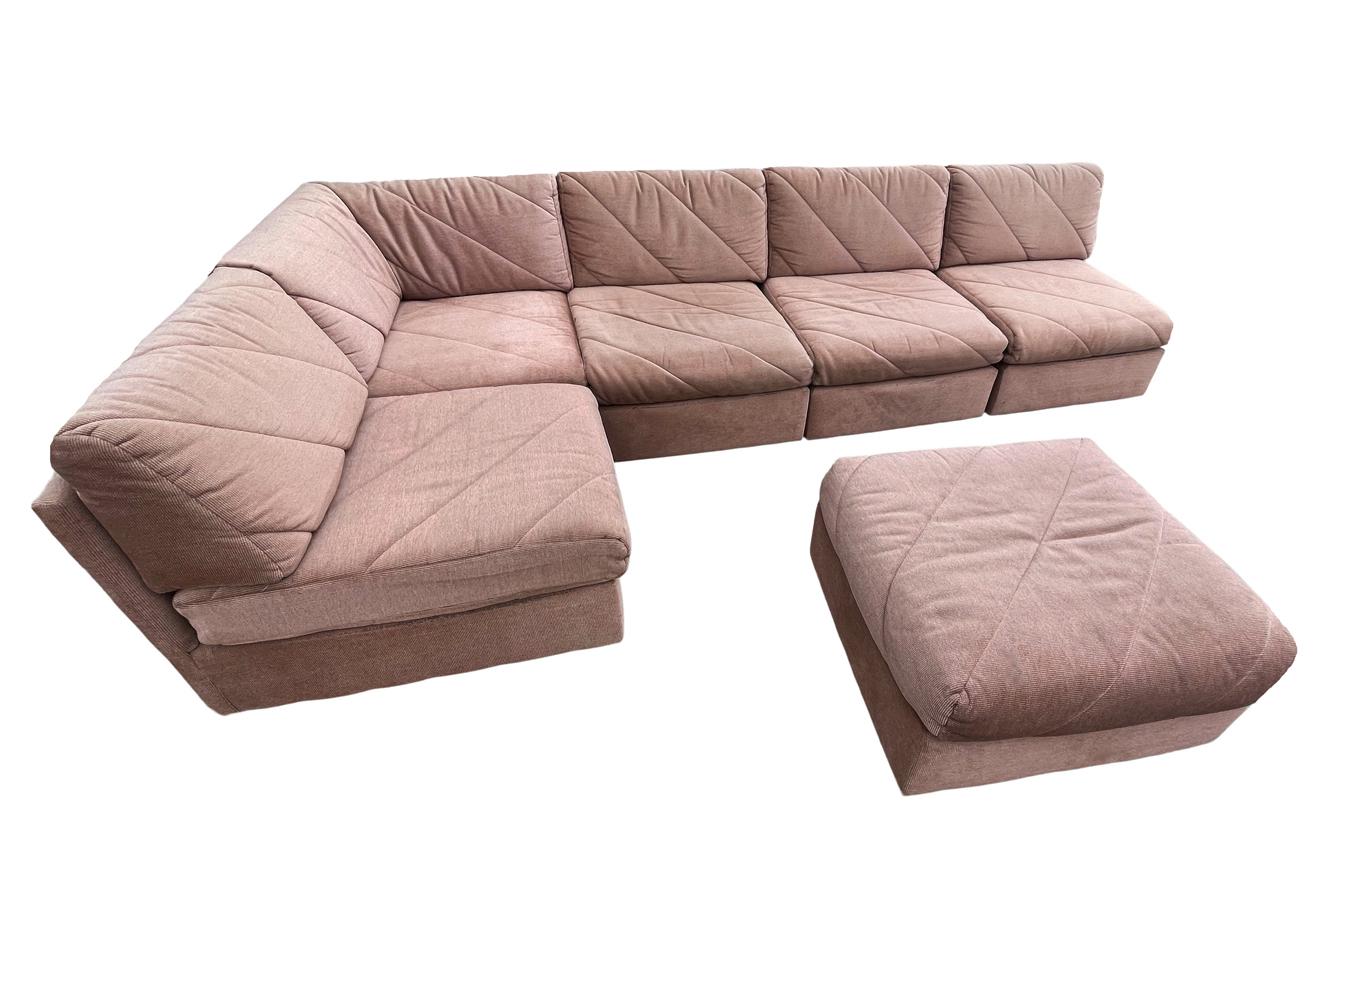 Six Piece Mid Century Boxy Modern Modular or Sectional L Shaped Sofa For Sale 1